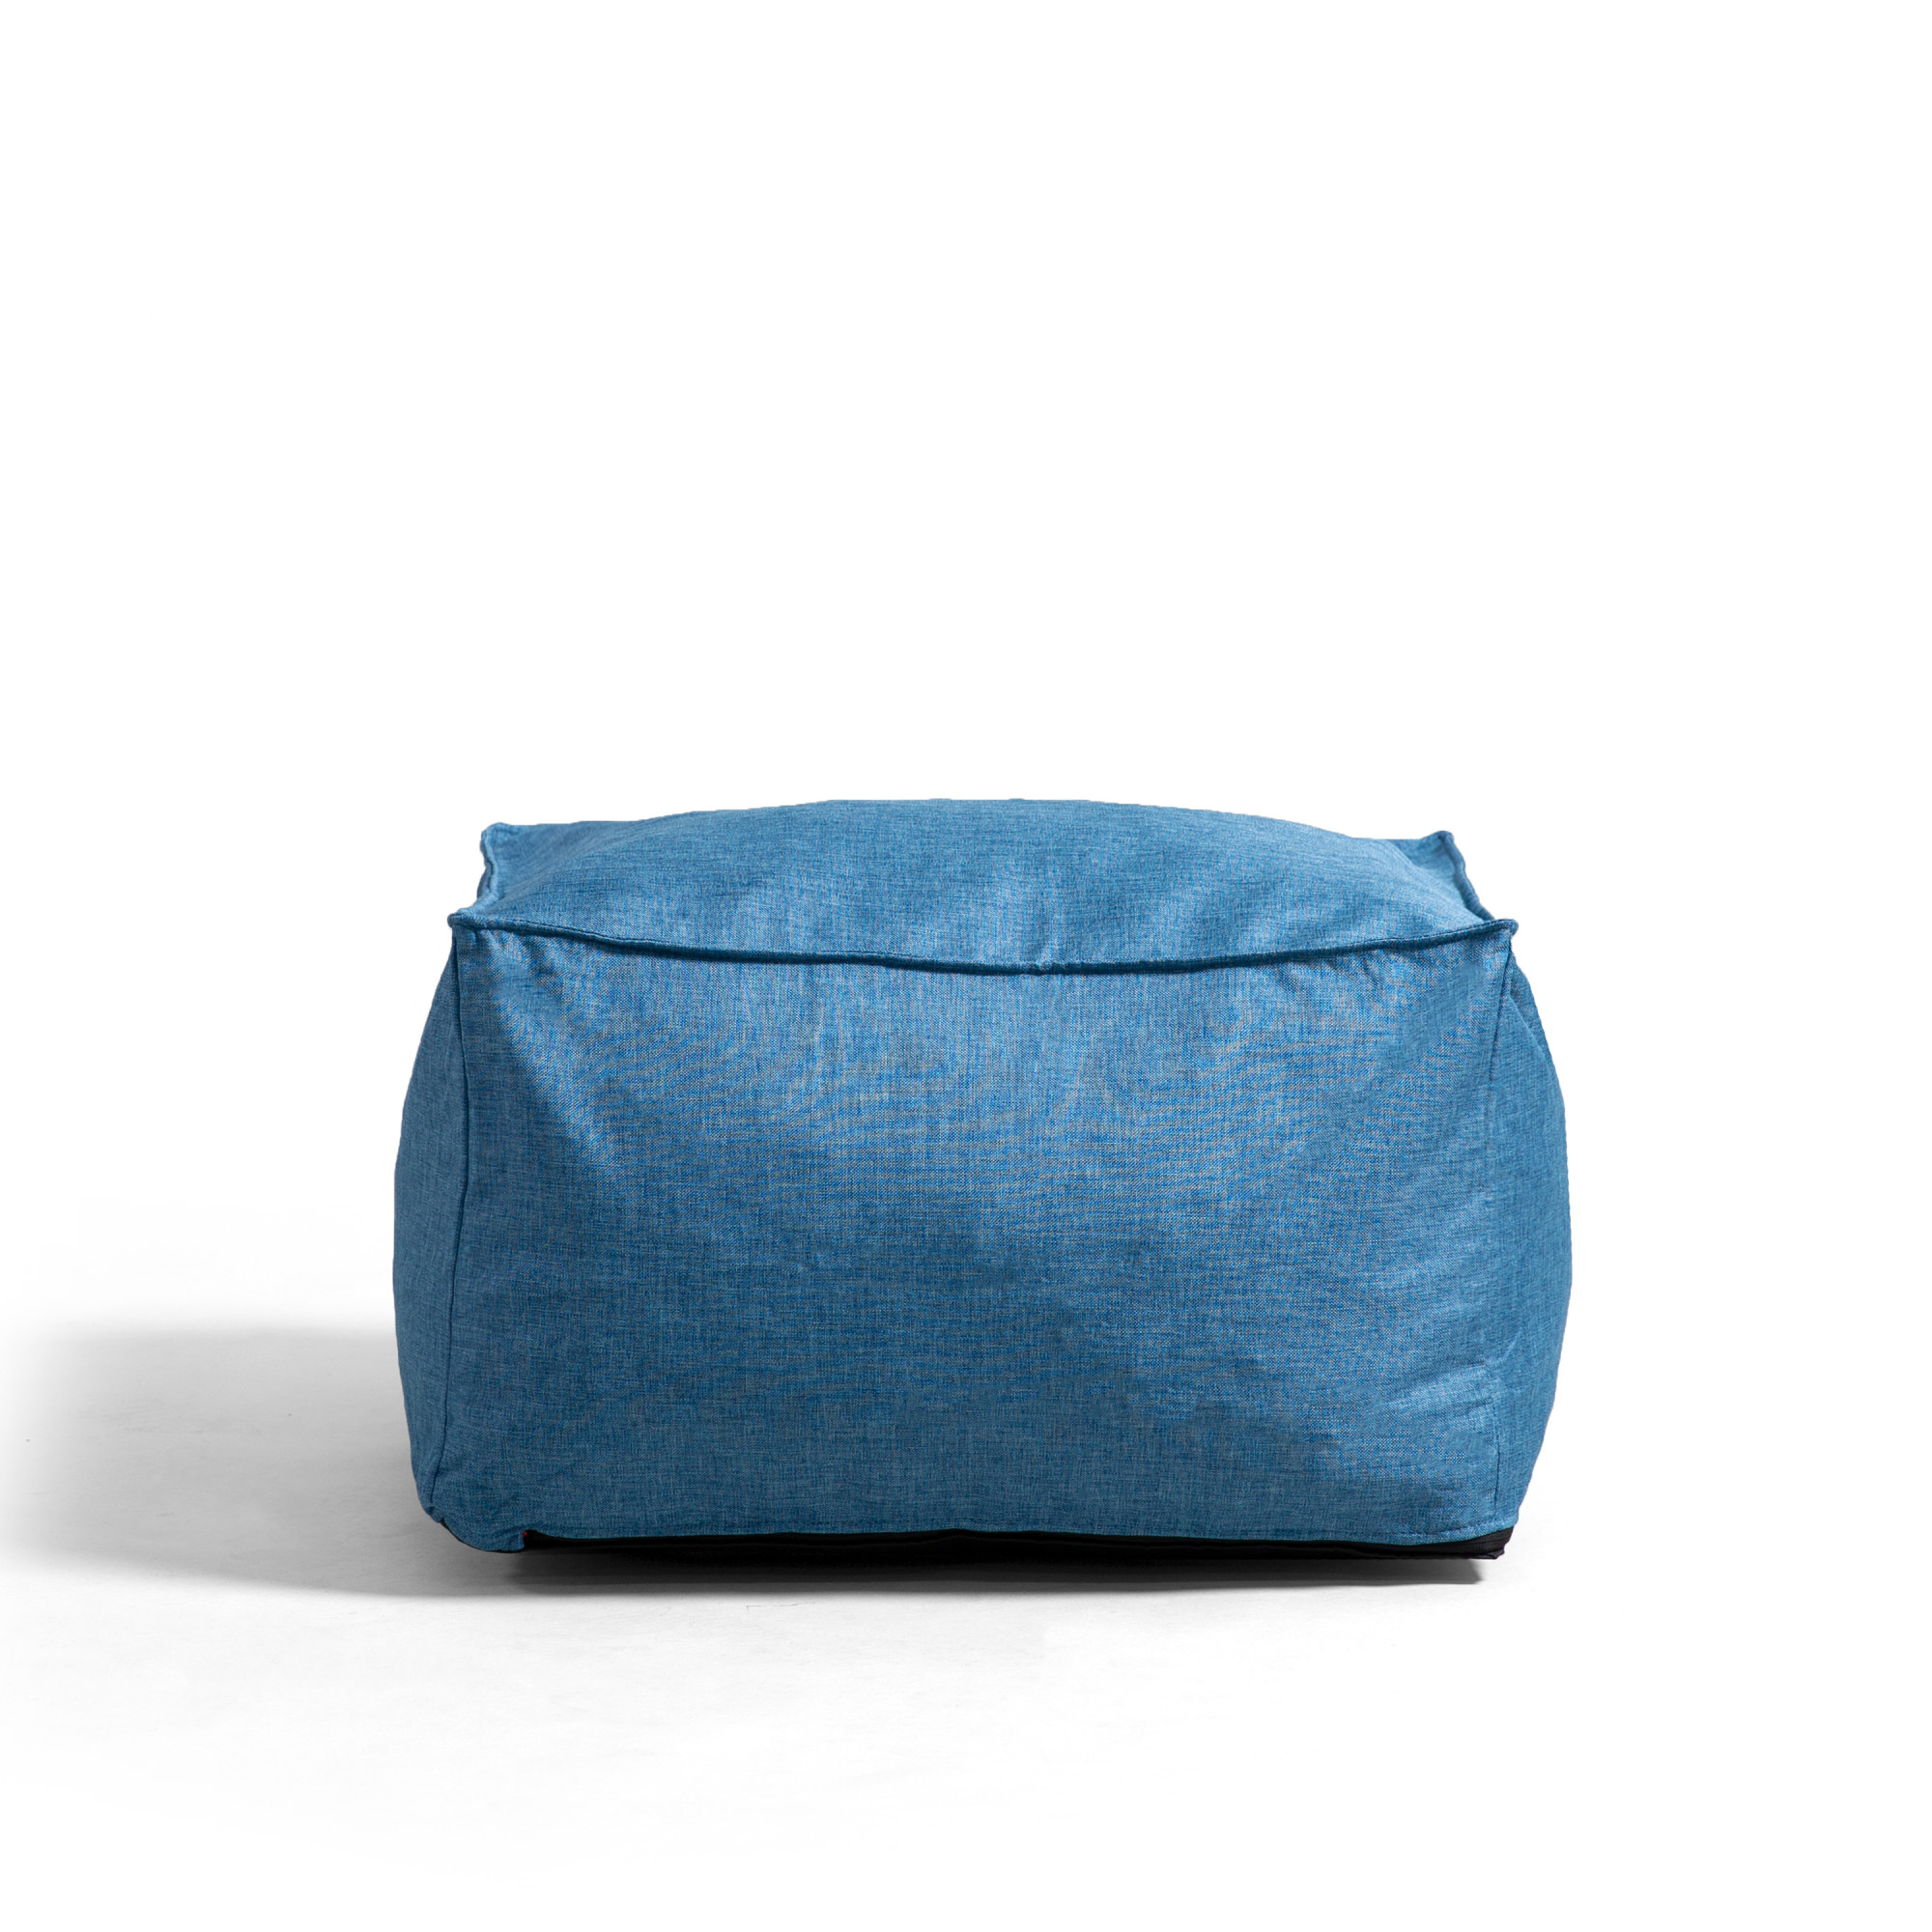 Big Joe Imperial Lounger Ottoman Foam Filled Bean Bag with Removable Cover, Pacific Blue Union, Durable Woven Polyester, 2 feet - image 1 of 8